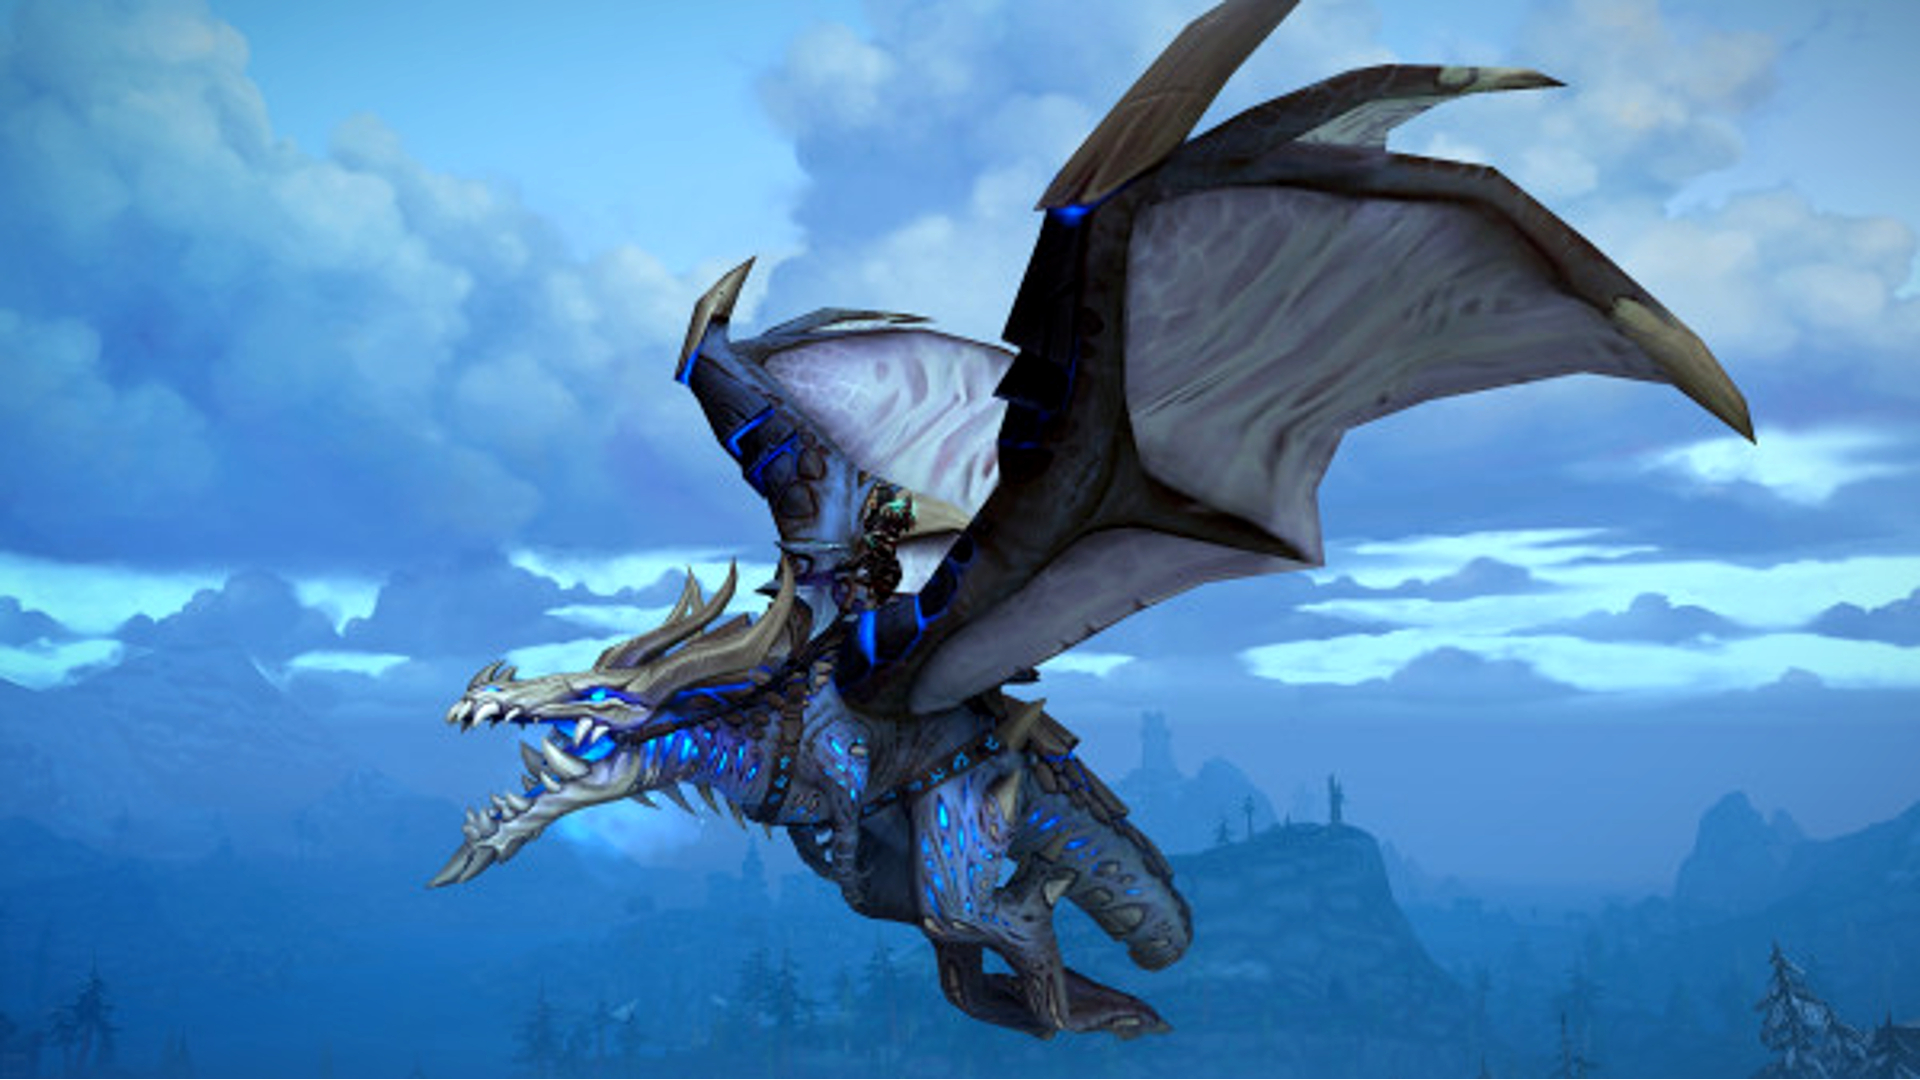 WoW Dragonflight gets a new Lich King mount, but only through Classic